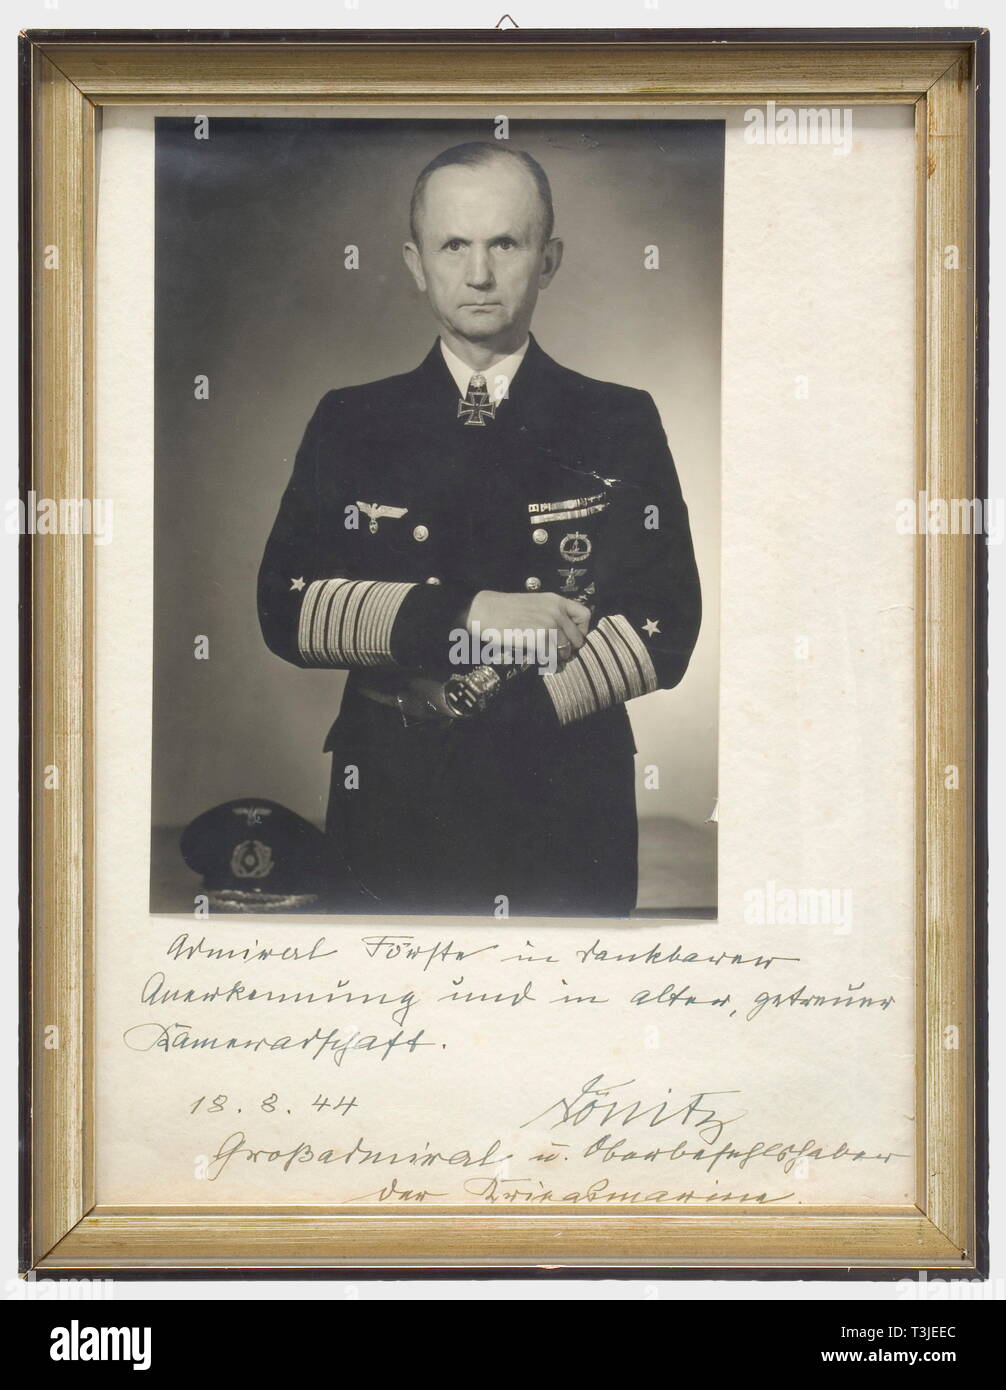 Grand Admiral Karl Dönitz, a 1944 official presentation photograph to Admiral Förster Large format studio photo in uniform with the Knight's Cross with Oak Leaves, and the Grand Admiral's baton in his right hand. On passepartout with hand-written dedication in ink (translated), 'Admiral Förster in thankful recognition and in old, loyal friendship, 18 August 1944 Dönitz, Grand Admiral and Commander-in-Chief of the Navy'. 20 x 28 cm, in a simple wooden frame, 34 x 44 cm. people, 1930s, 20th century, navy, naval forces, military, militaria, branch of service, branches of servi, Editorial-Use-Only Stock Photo